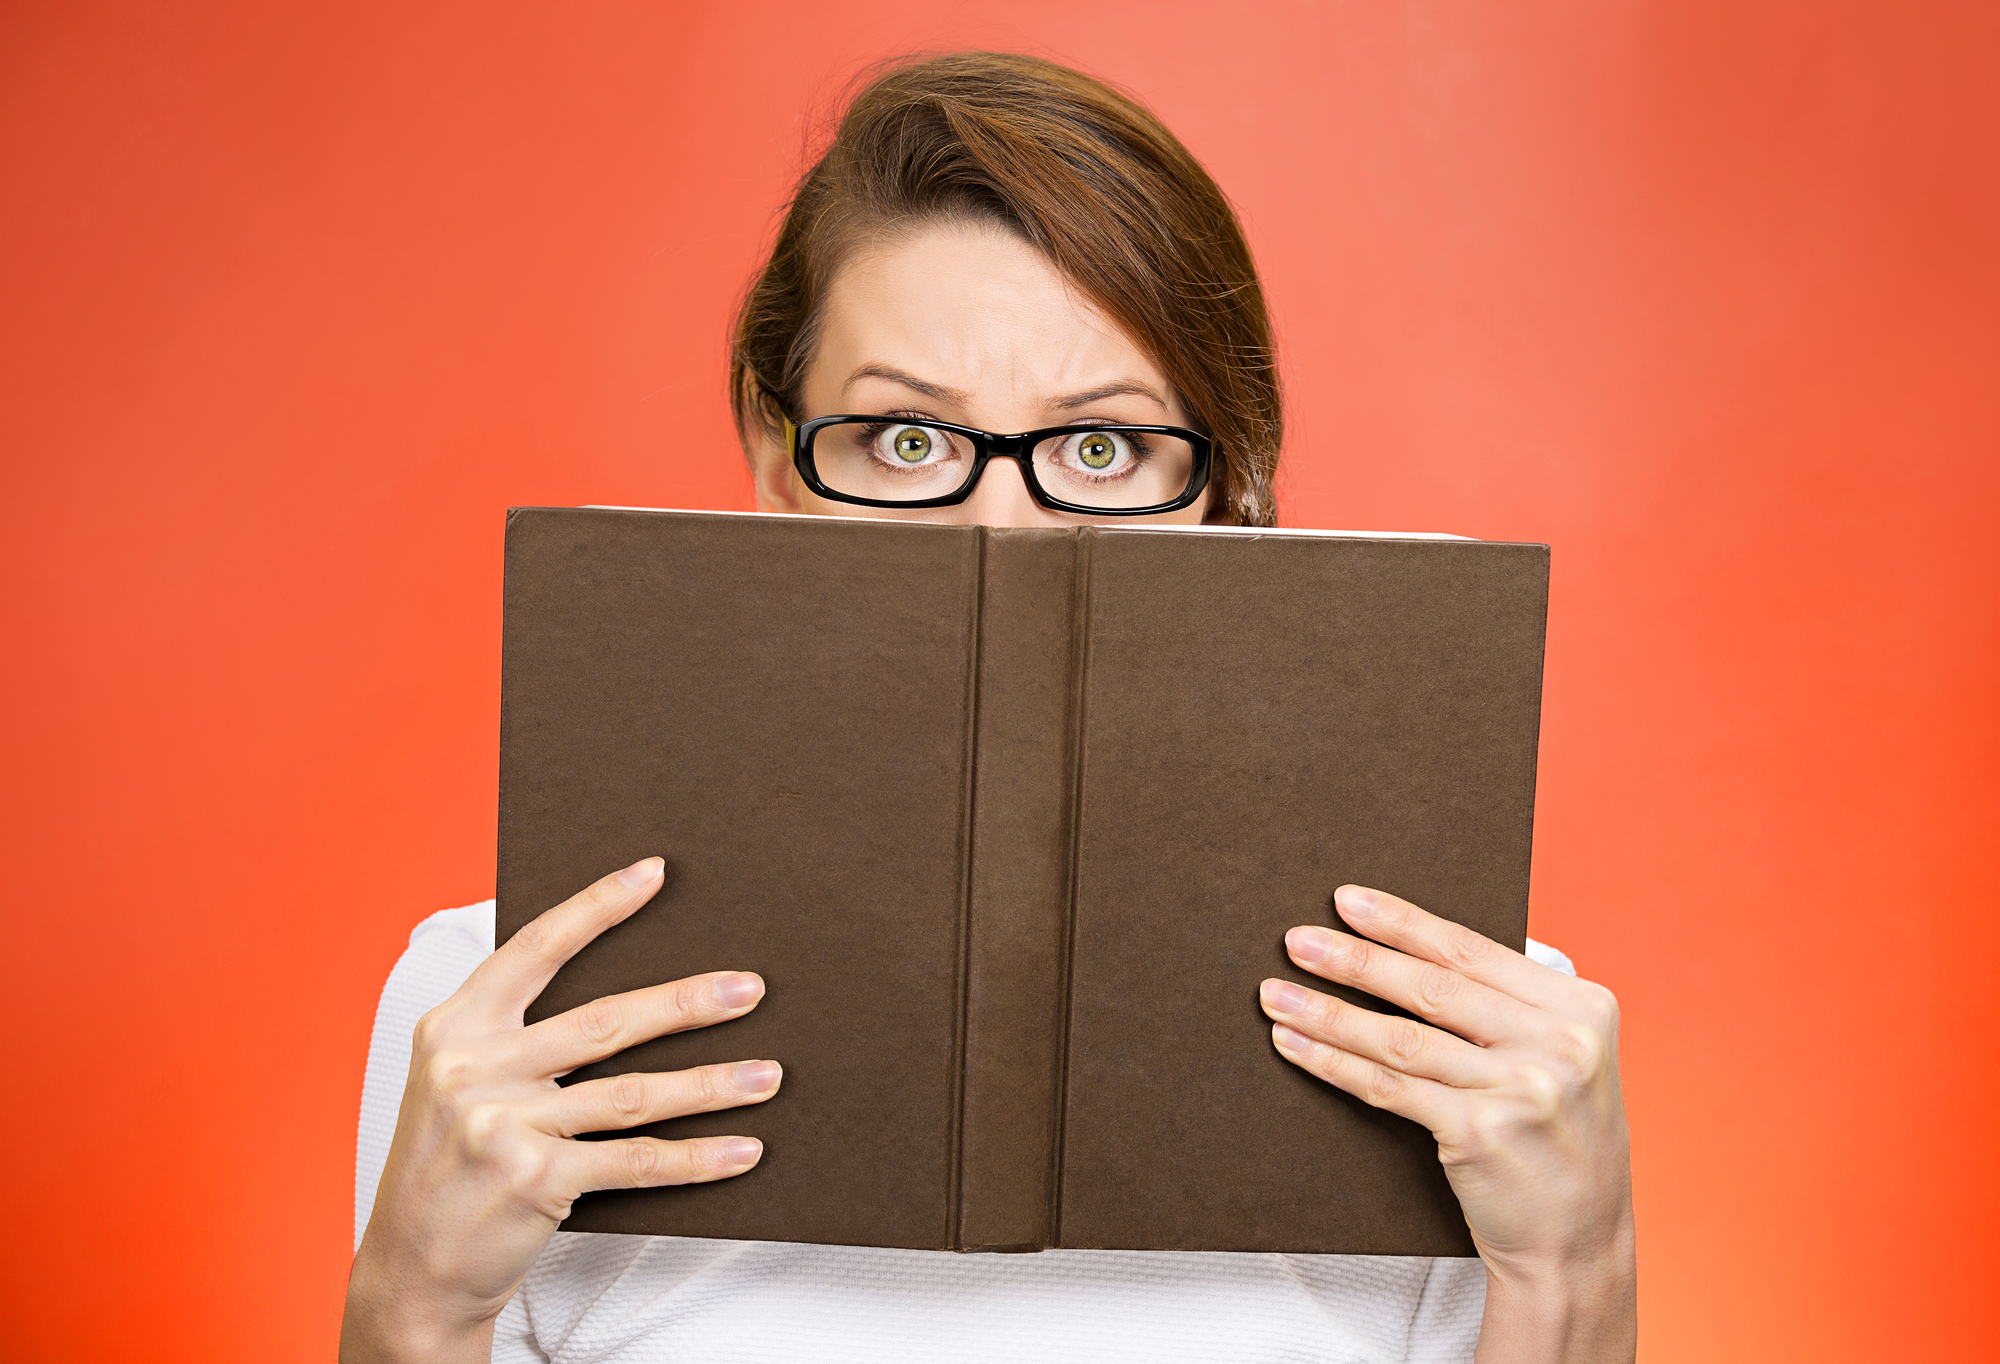 Closeup portrait of woman with glasses looking over a book with a red background.